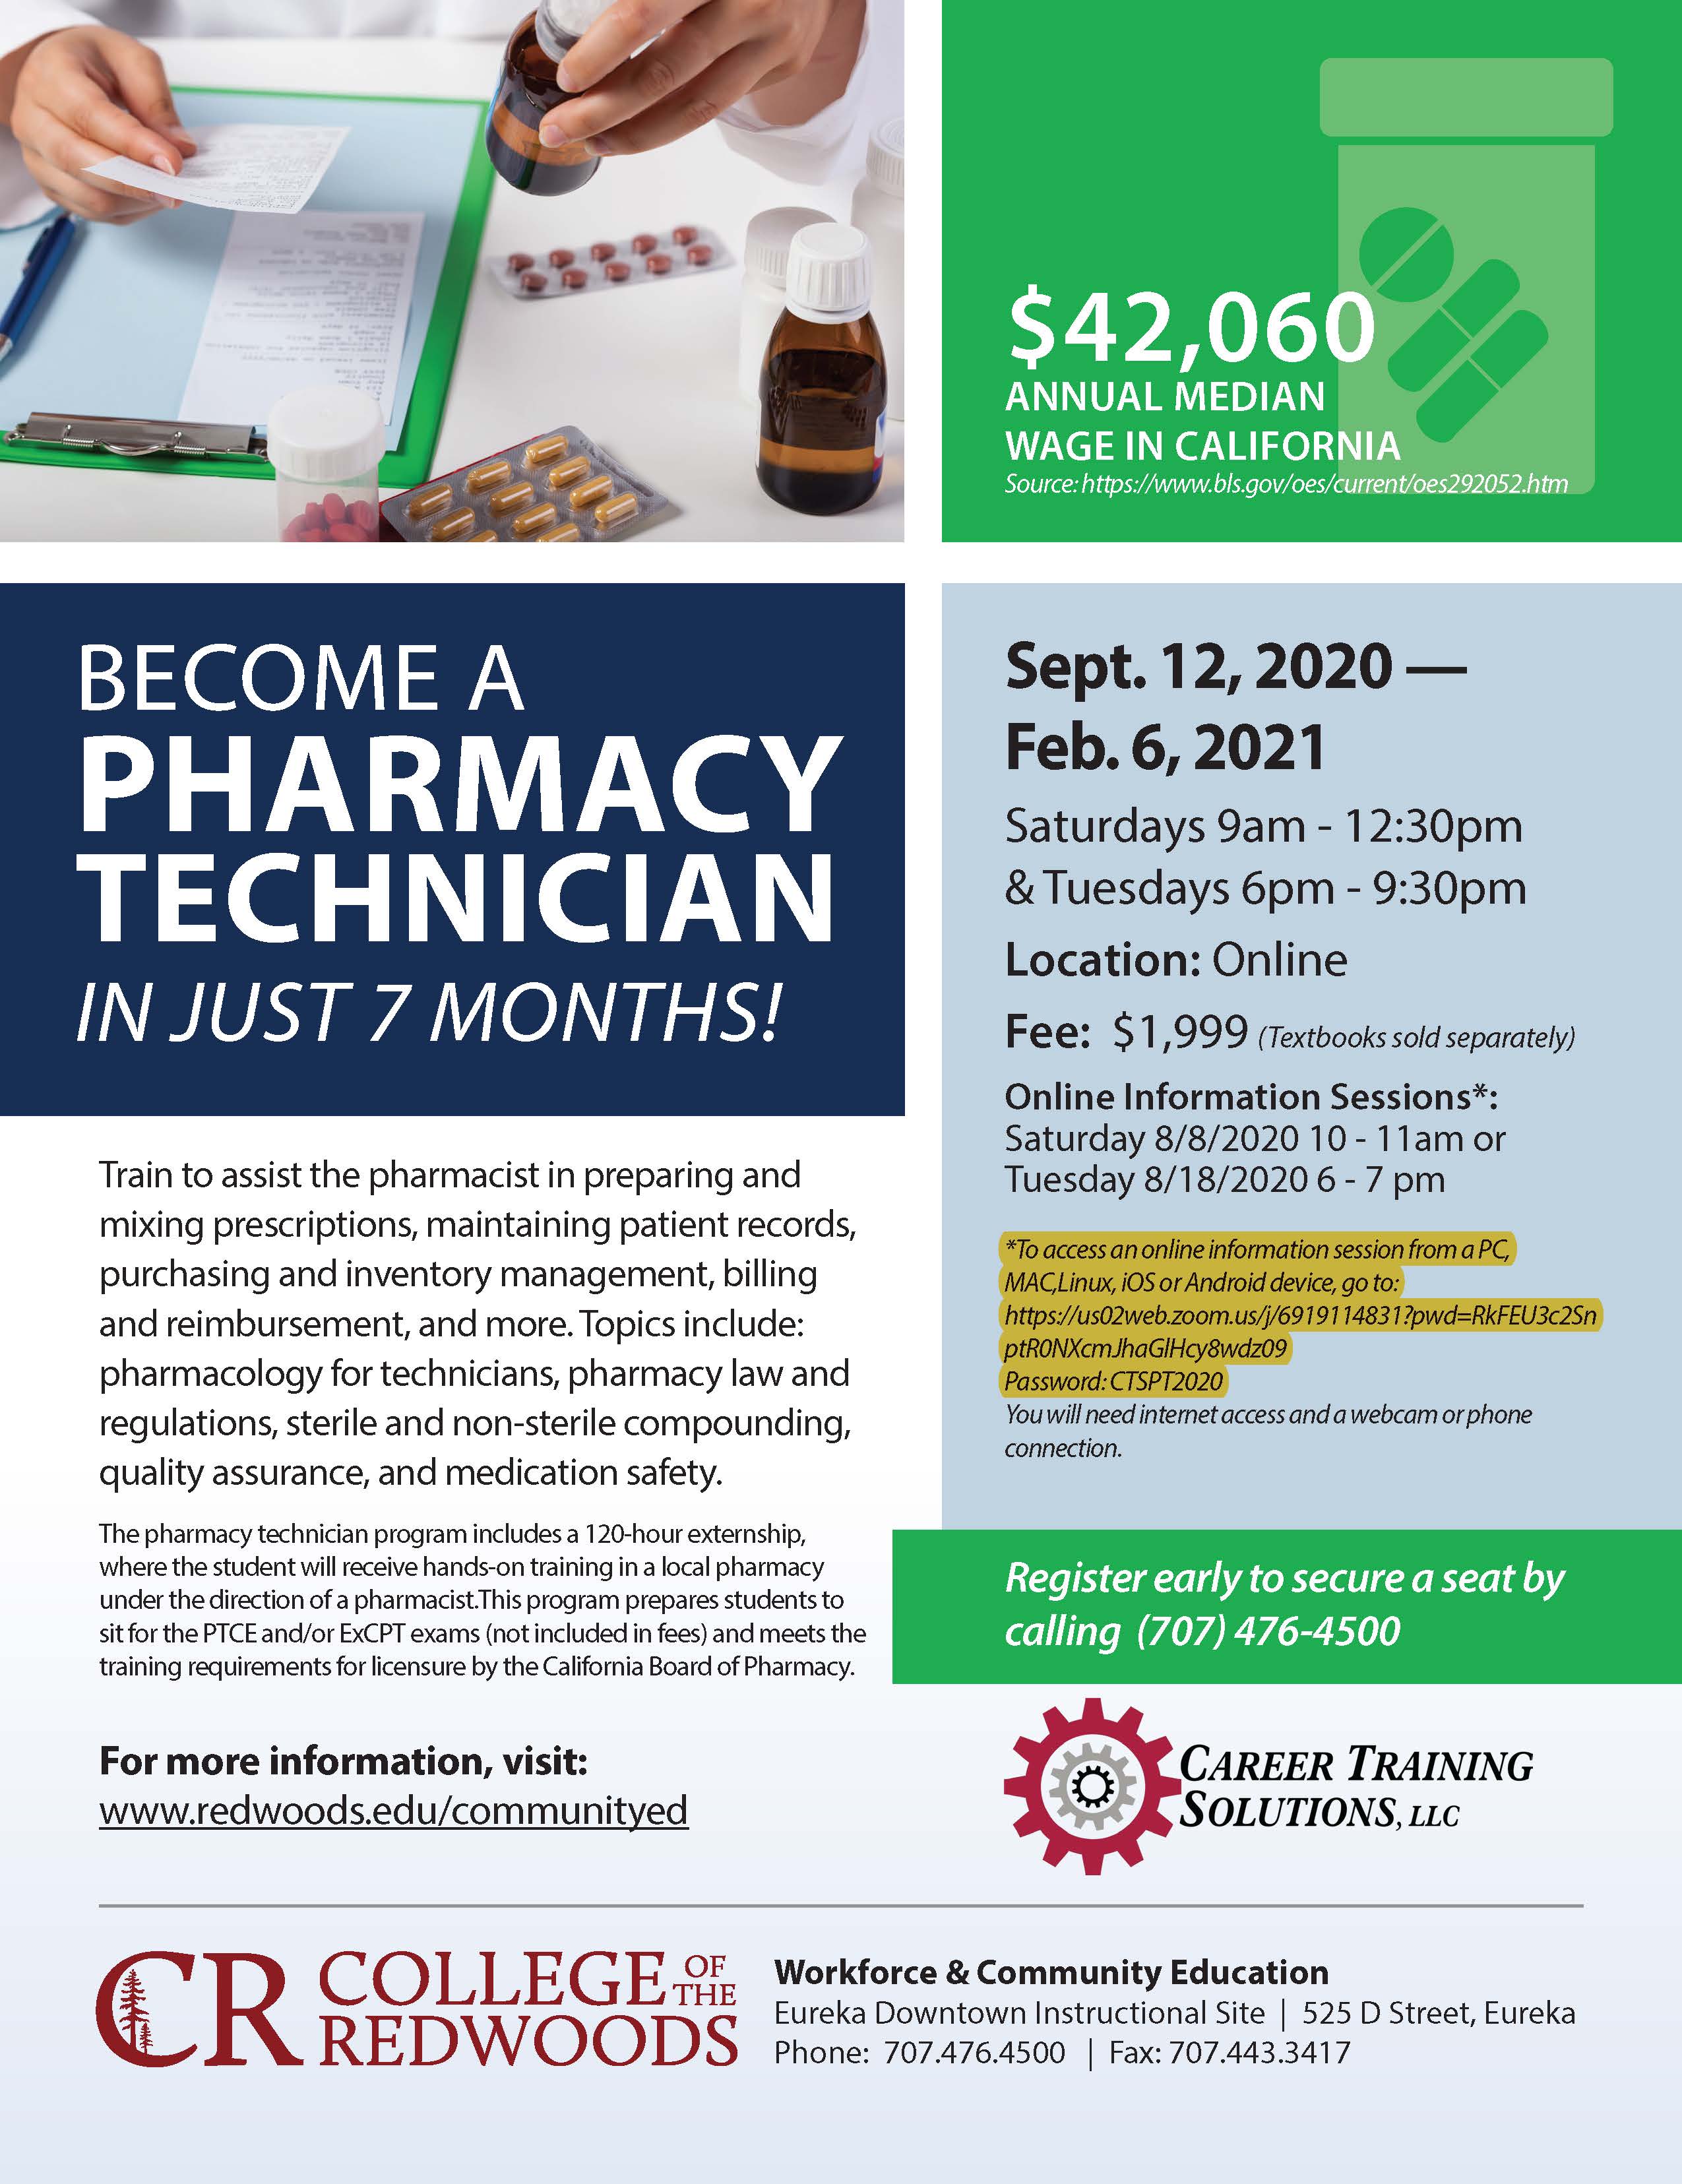 College Of The Redwoods Workforce And Community Education Introduces New Pharmacy Technician Program - College Of The Redwoods Home